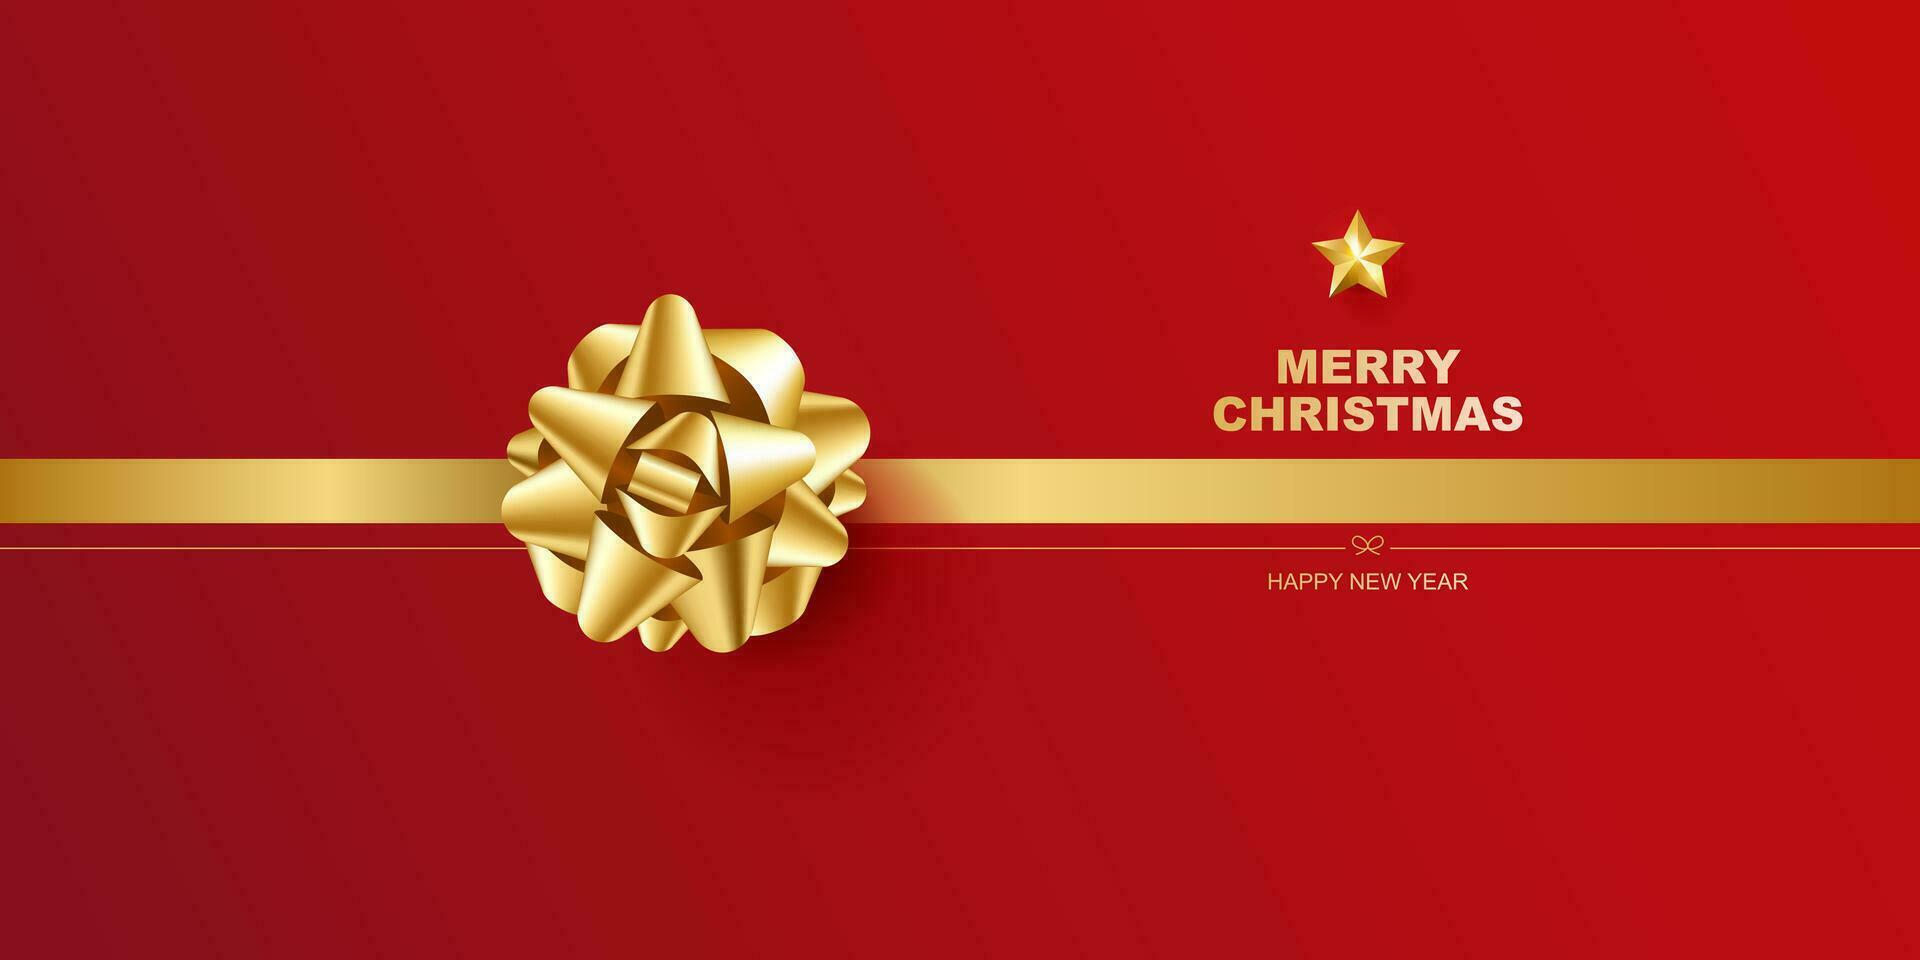 Merry Christmas background vector. Winter Christmas background with xmas. vector